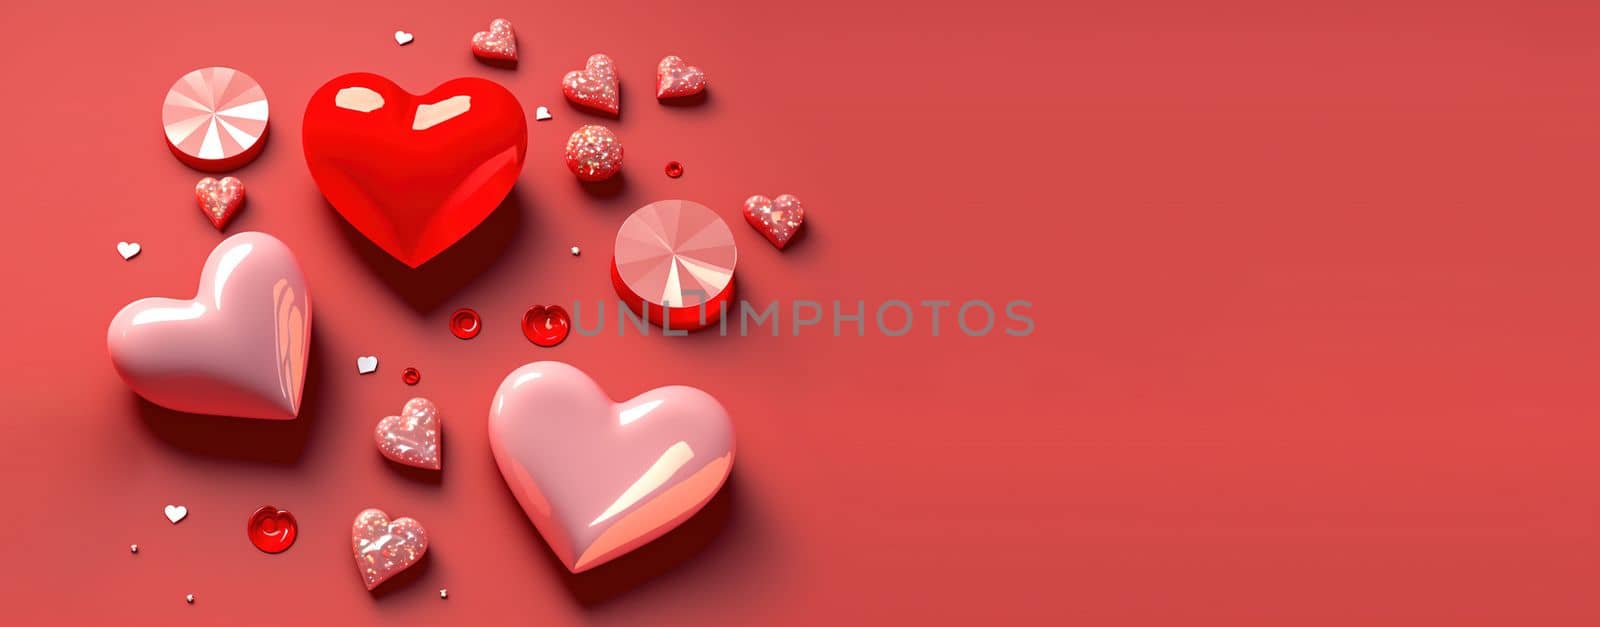 Valentine's Day Romance A Heart Diamond and Crystal Themed Banner and Background by templator